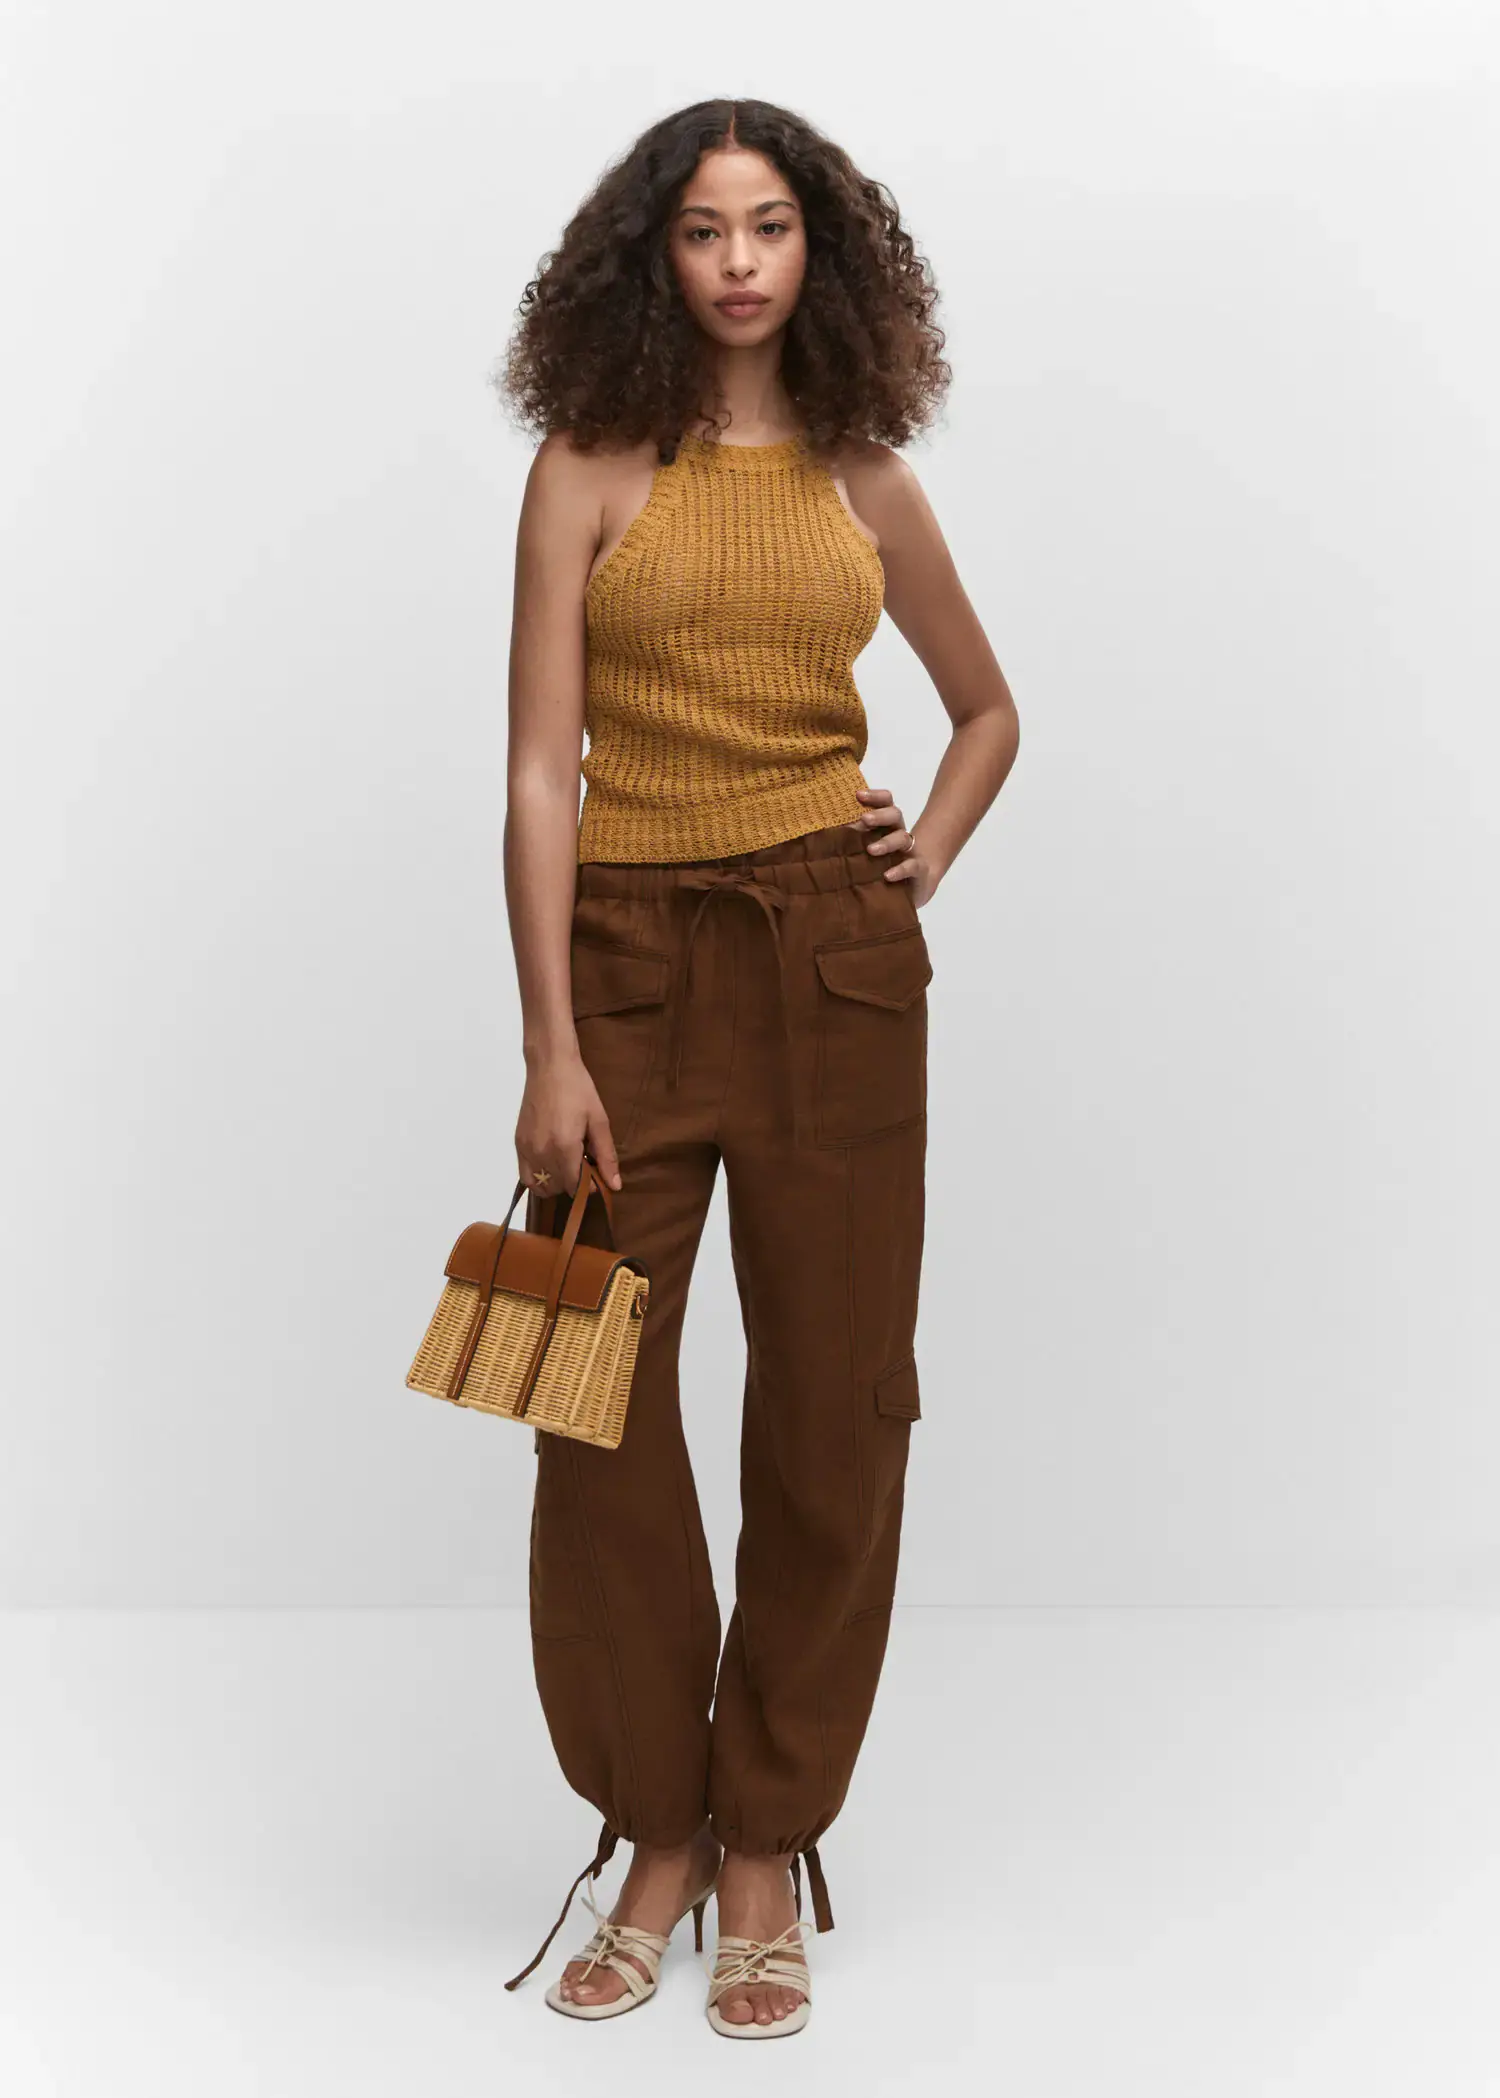 Mango Halter-neck knitted top. a woman standing in front of a white wall holding a purse. 